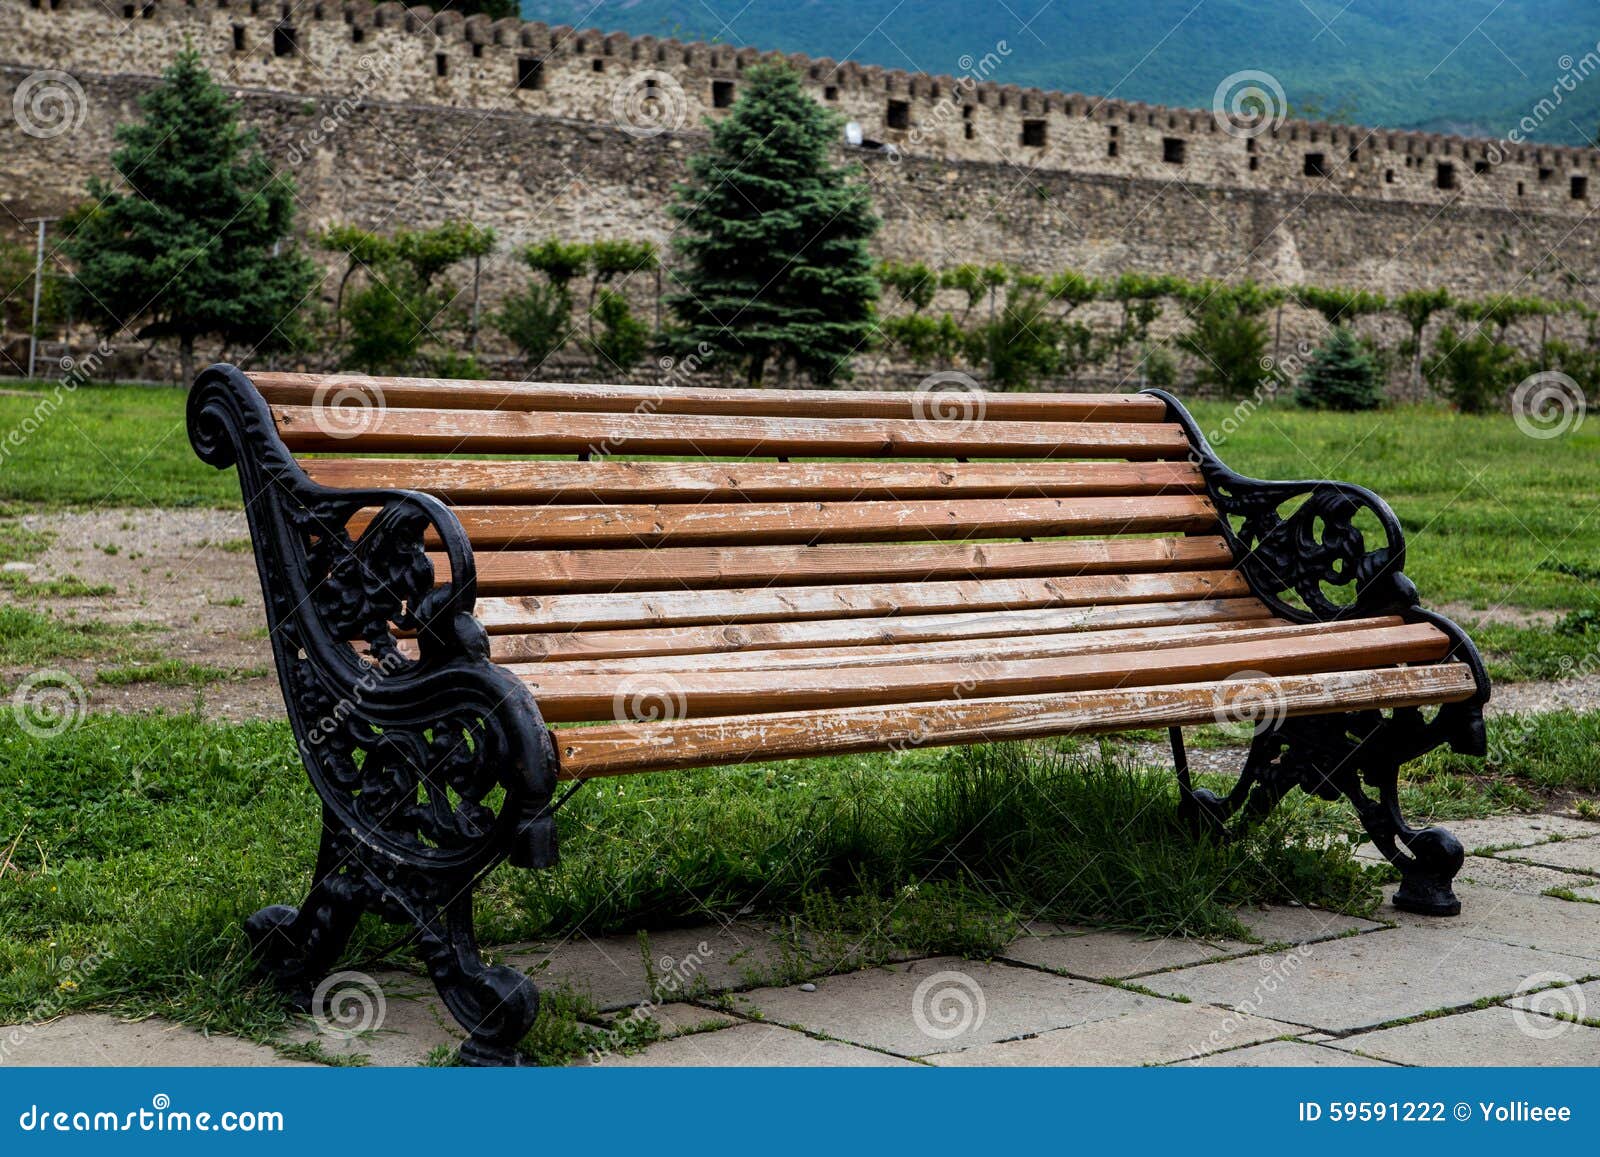 A Bench in Old Monastery S Yard Stock Photo - Image of mountain